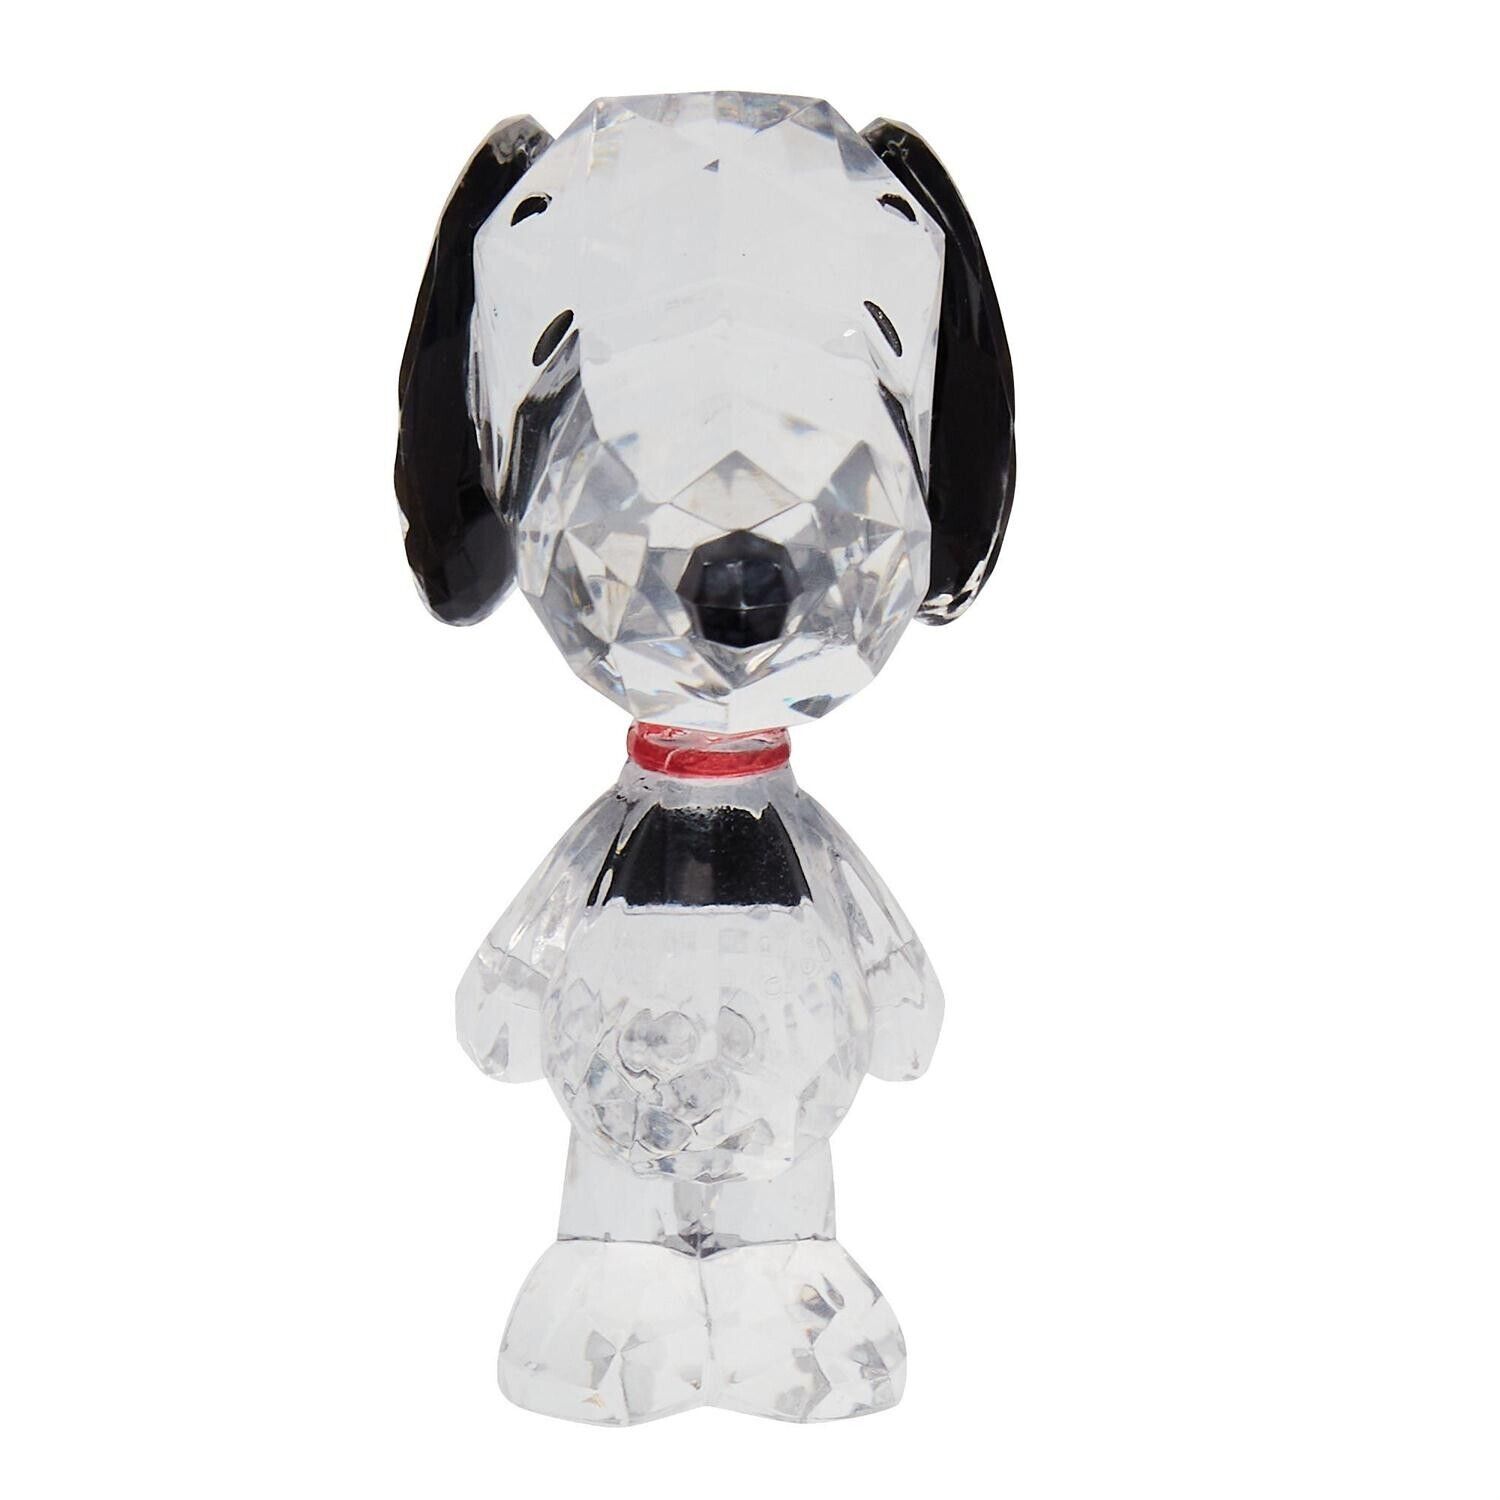 Enesco FACETS Peanuts Snoopy 3.25 Inches Tall Acrylic Figurine 6011525